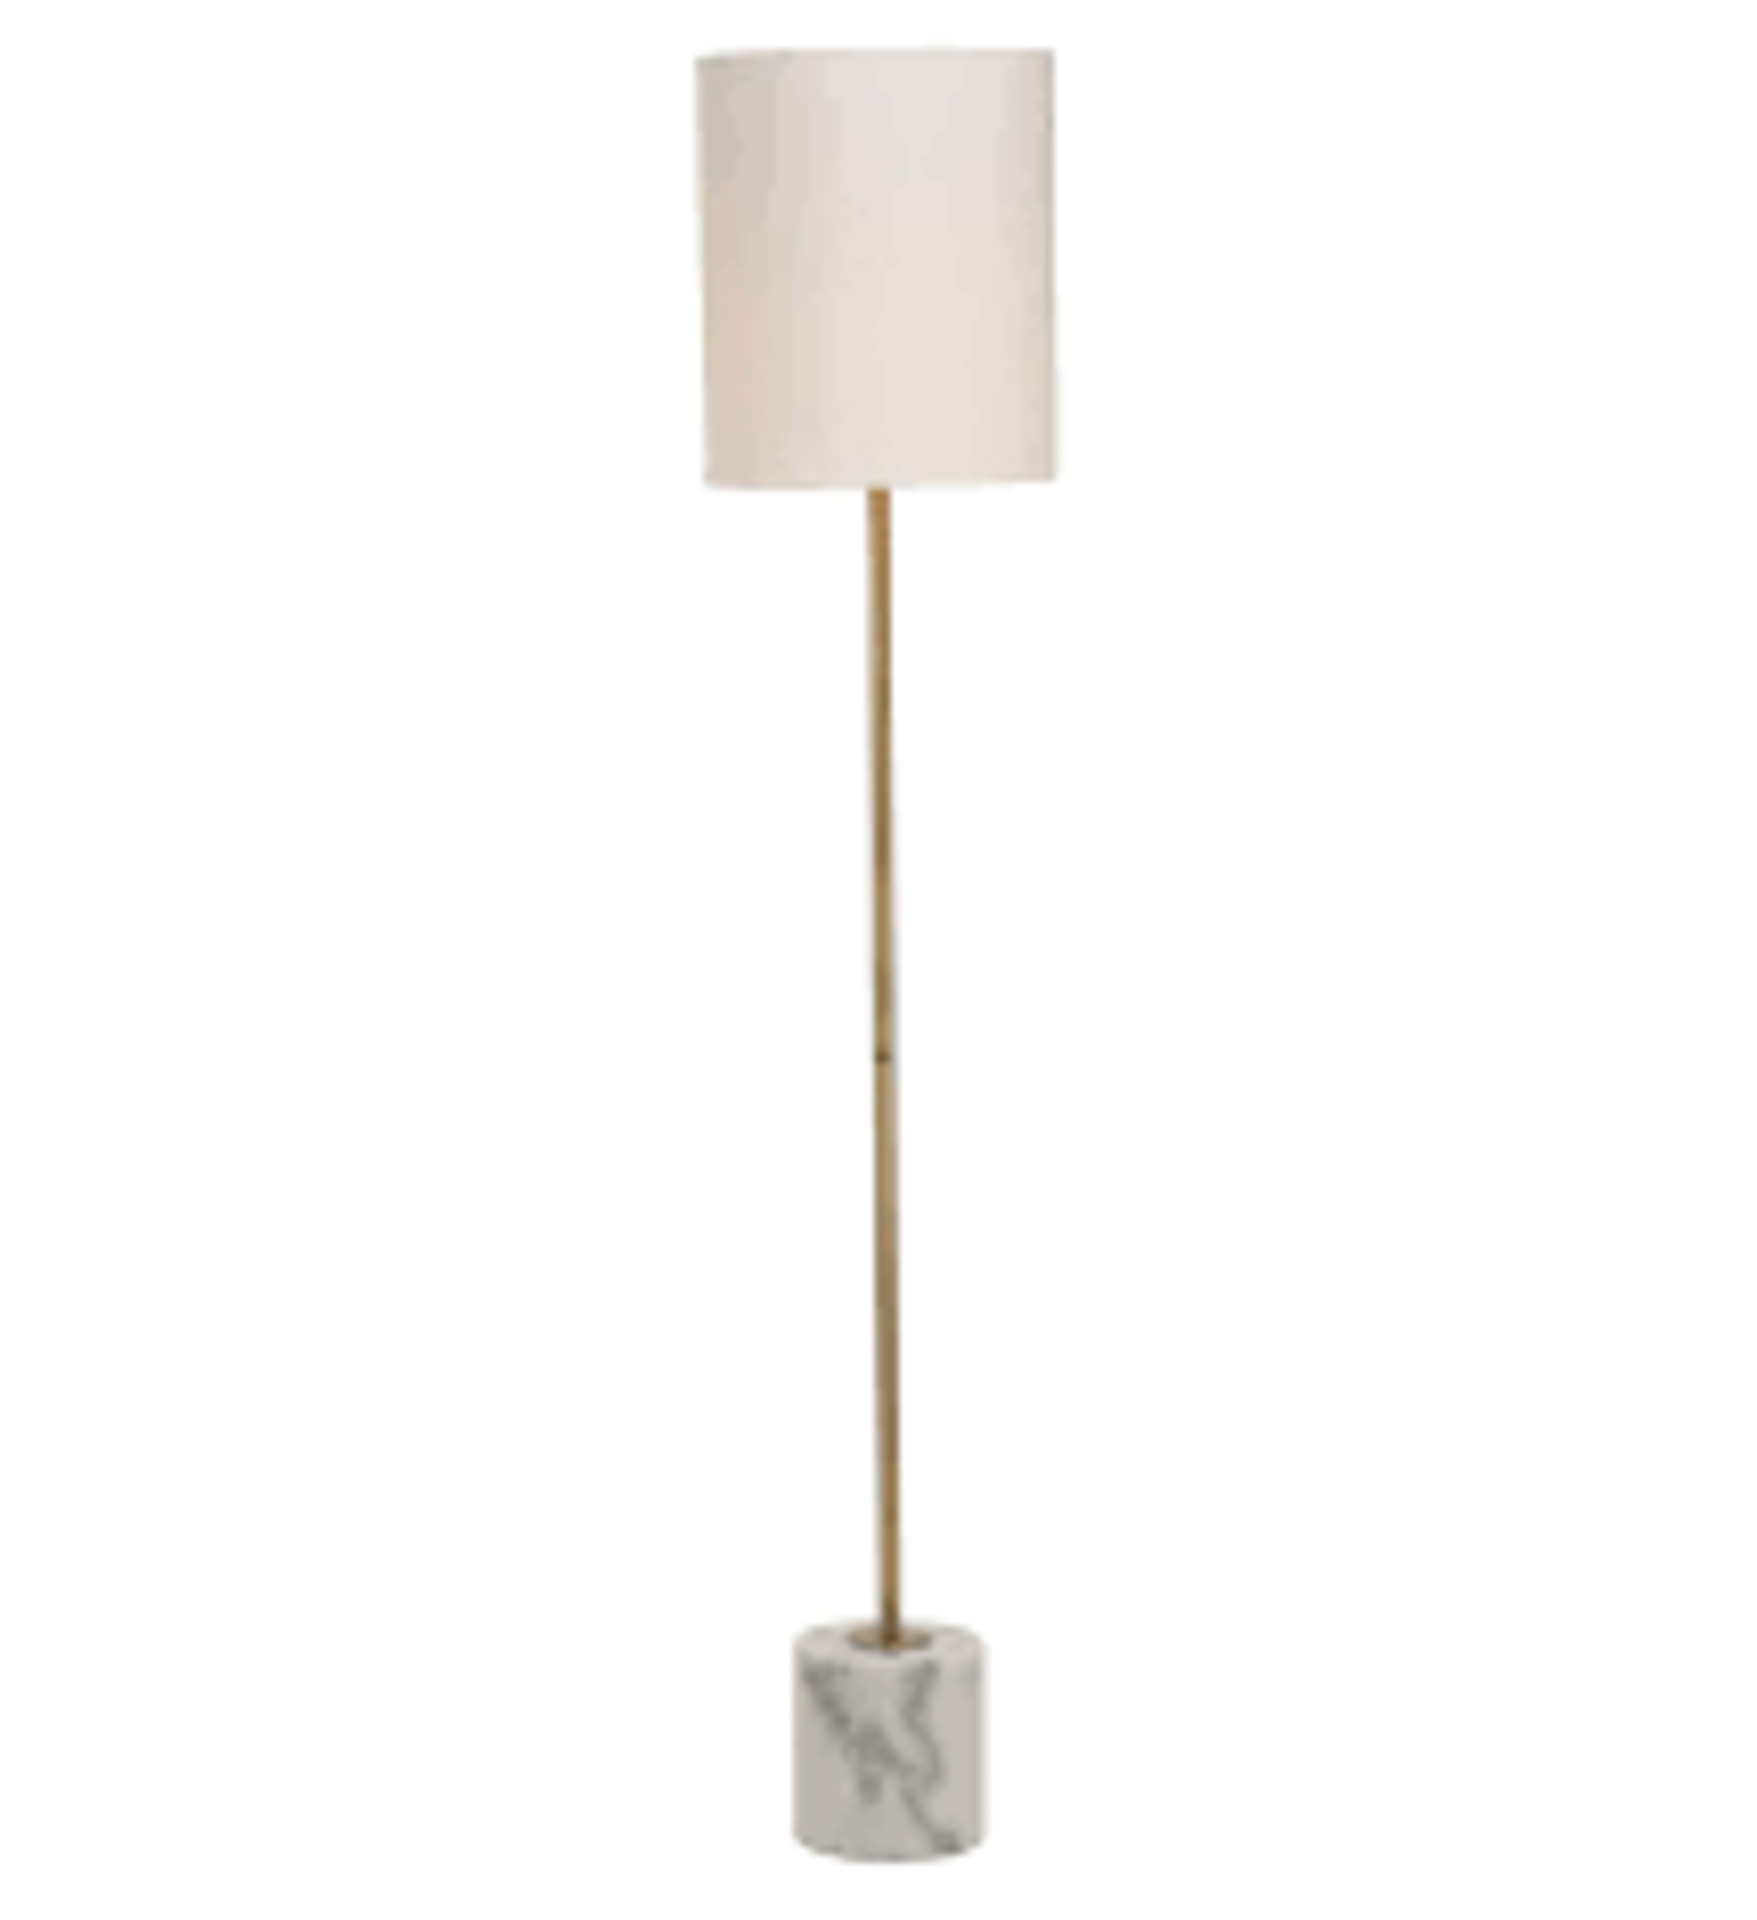 Boxed Bianco Rose Gold and Marble Floor Lamp RRP £120 (16350) (Public Viewing and Appraisals - Image 2 of 2